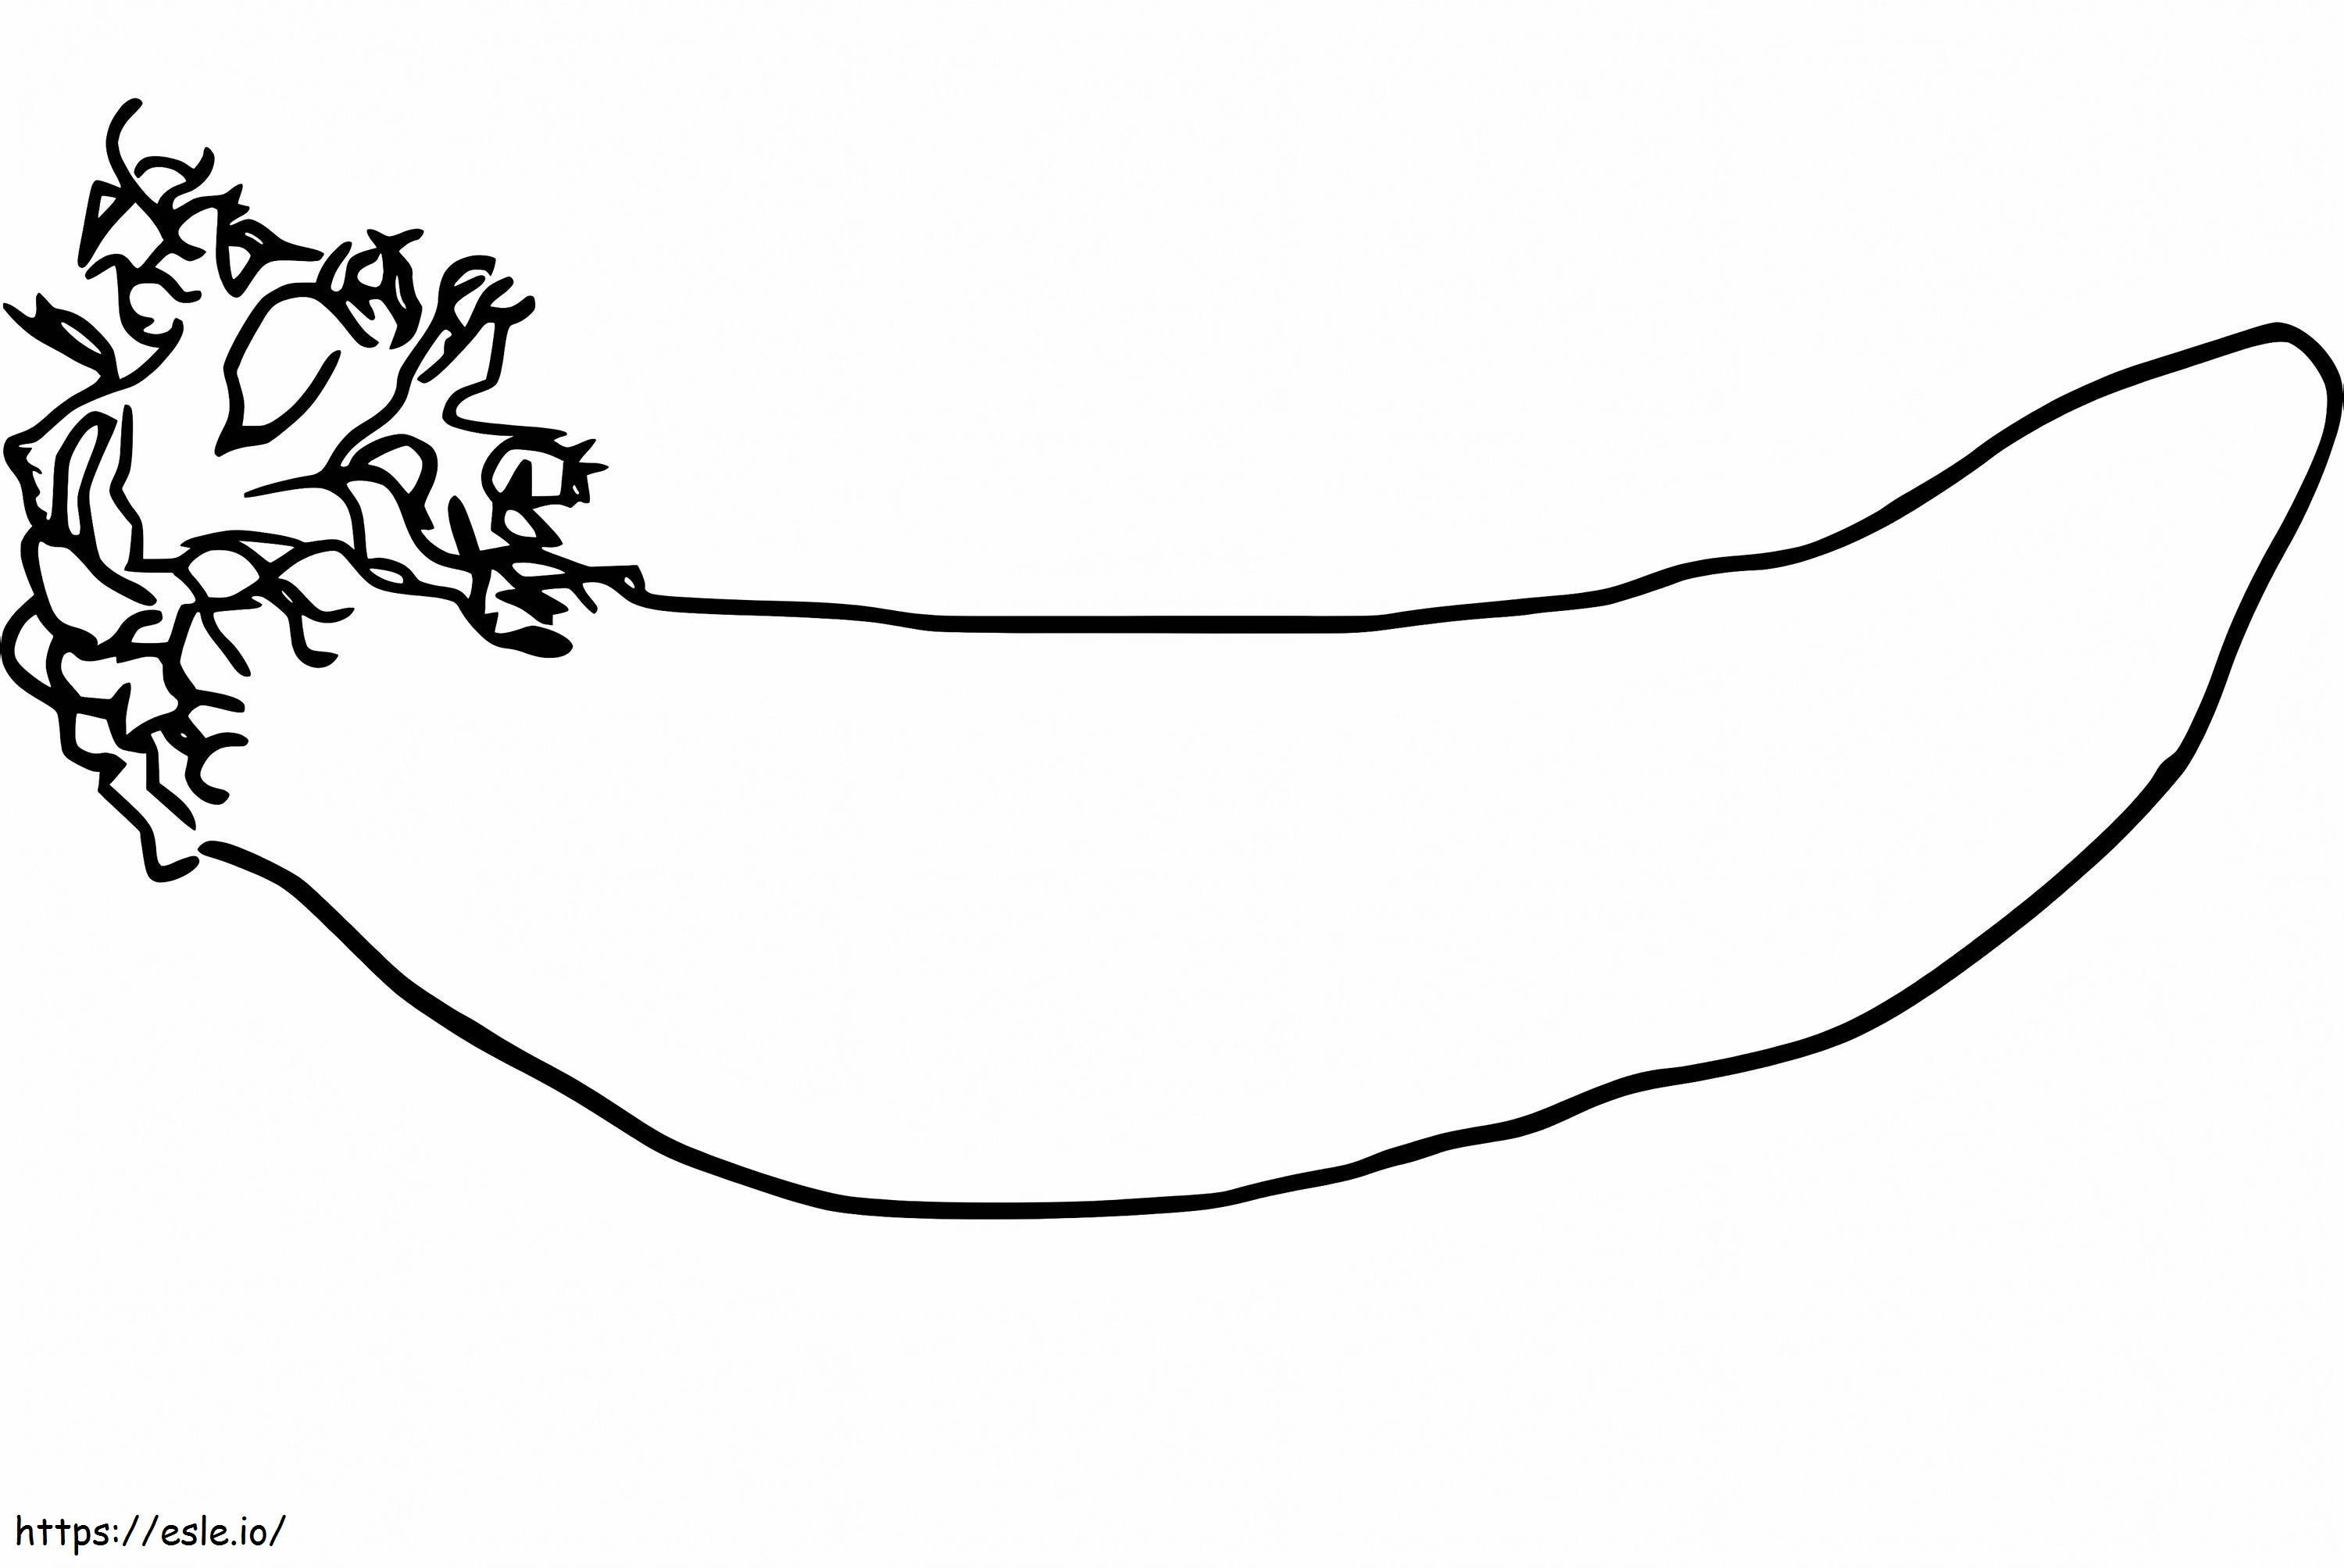 Simple Sea Cucumber coloring page